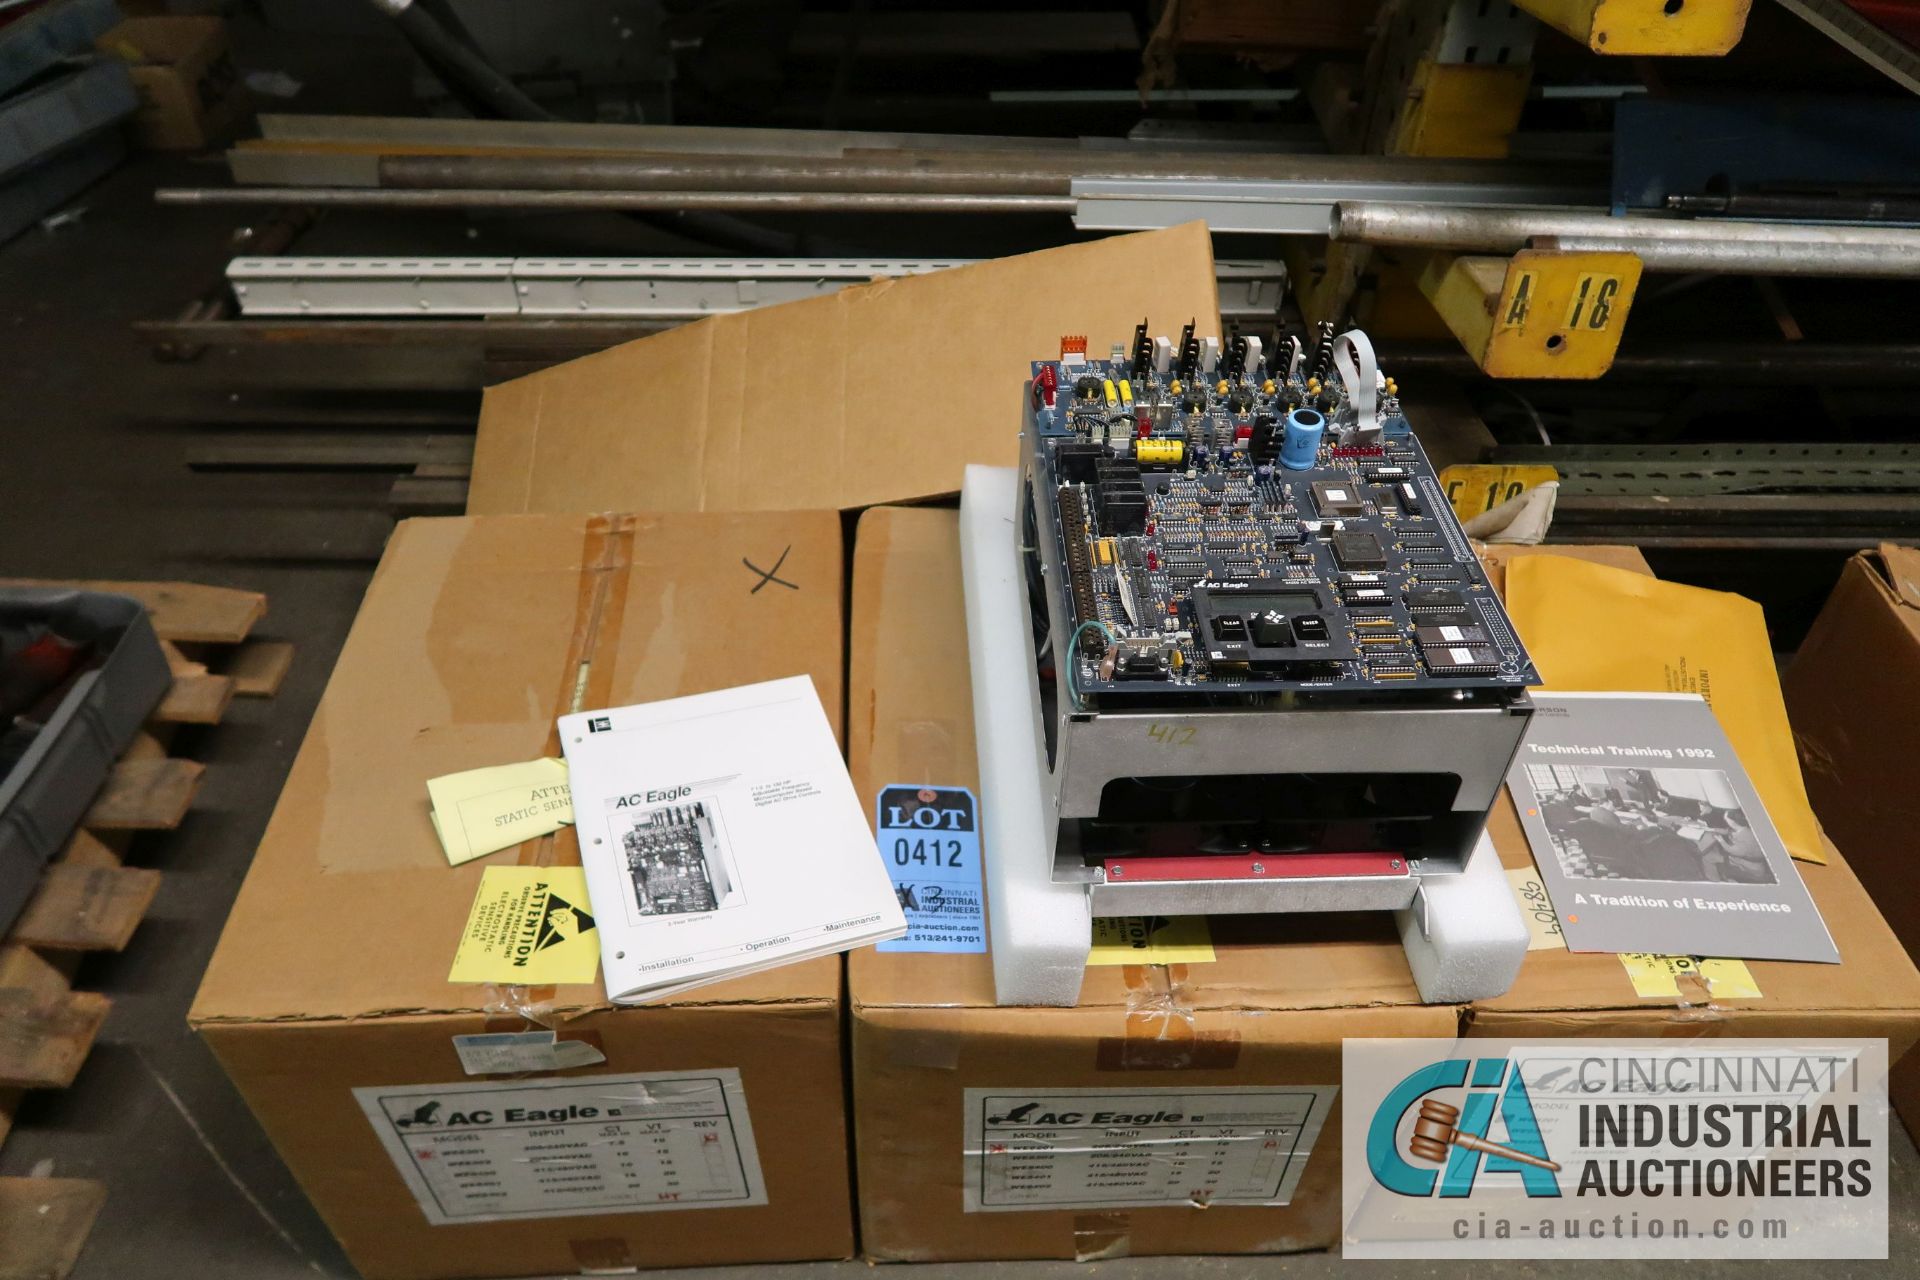 AC EAGLE / EMERSON MODEL WE8201 ADJUSTABLE FREQUENCY MICROCOMPUTER BASED DIGITAL AC DRIVES